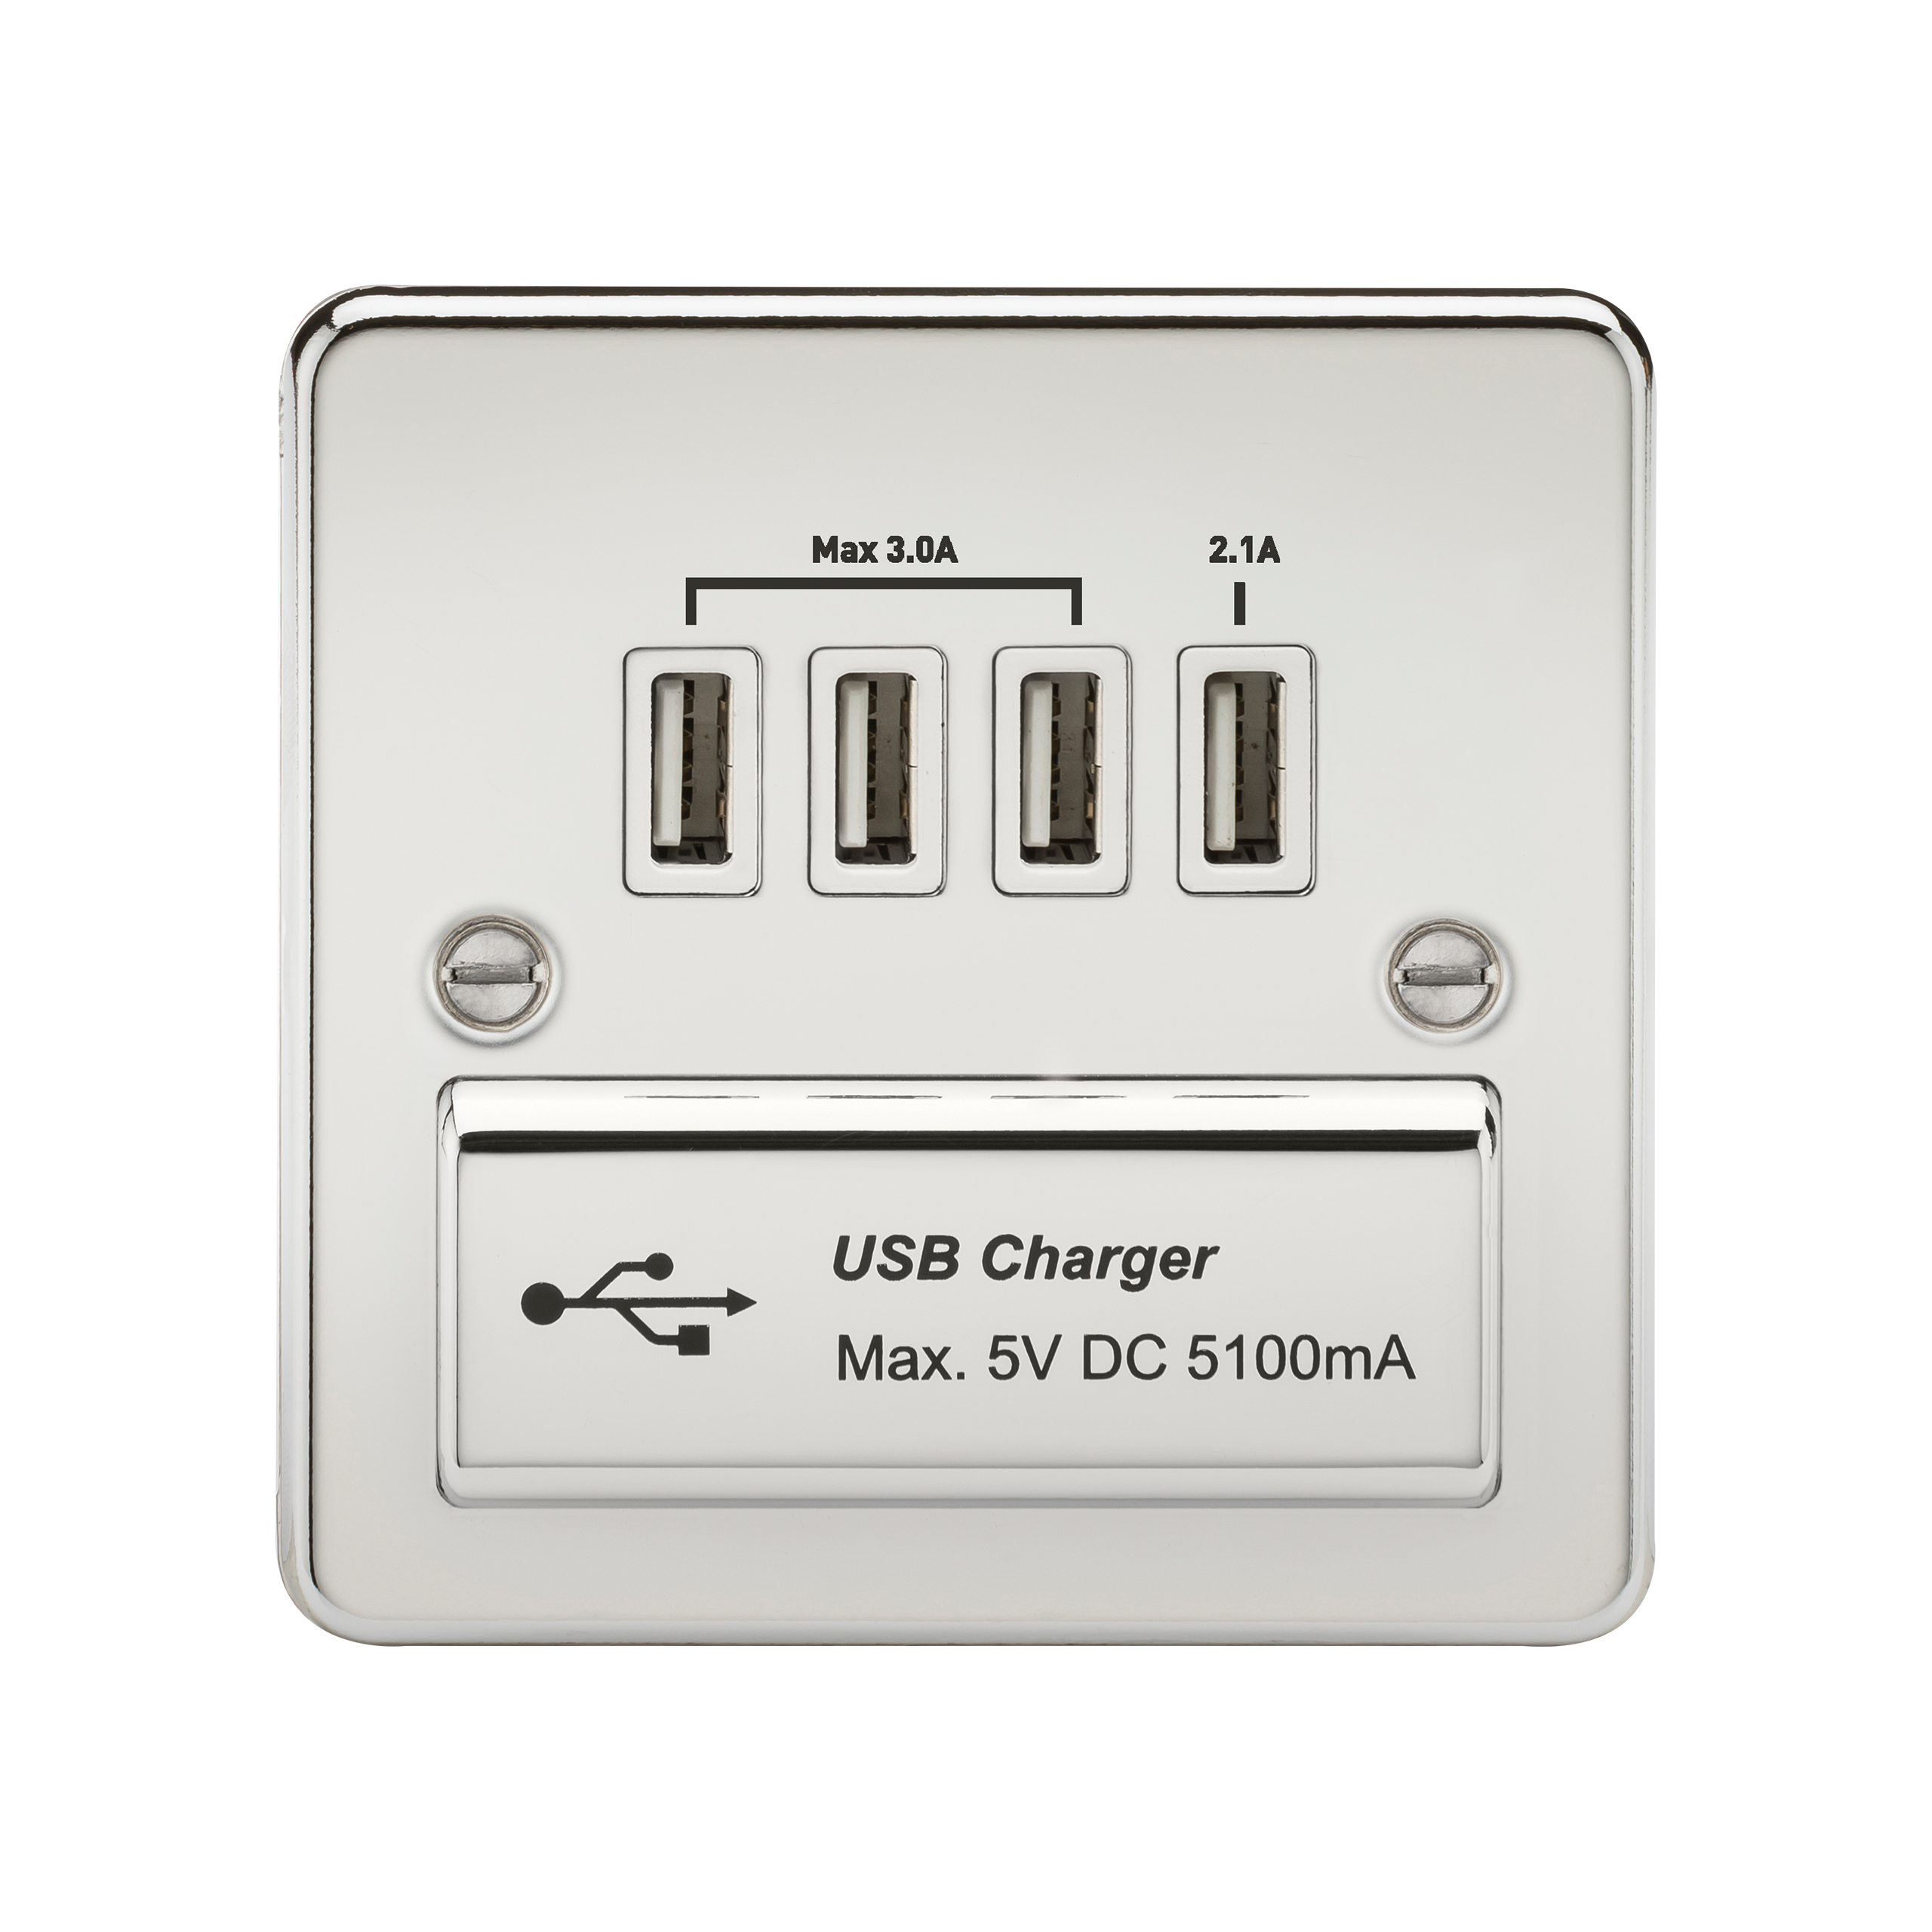 Flat Plate Quad USB Charger Outlet - Polished Chrome With White Insert - FPQUADPCW 